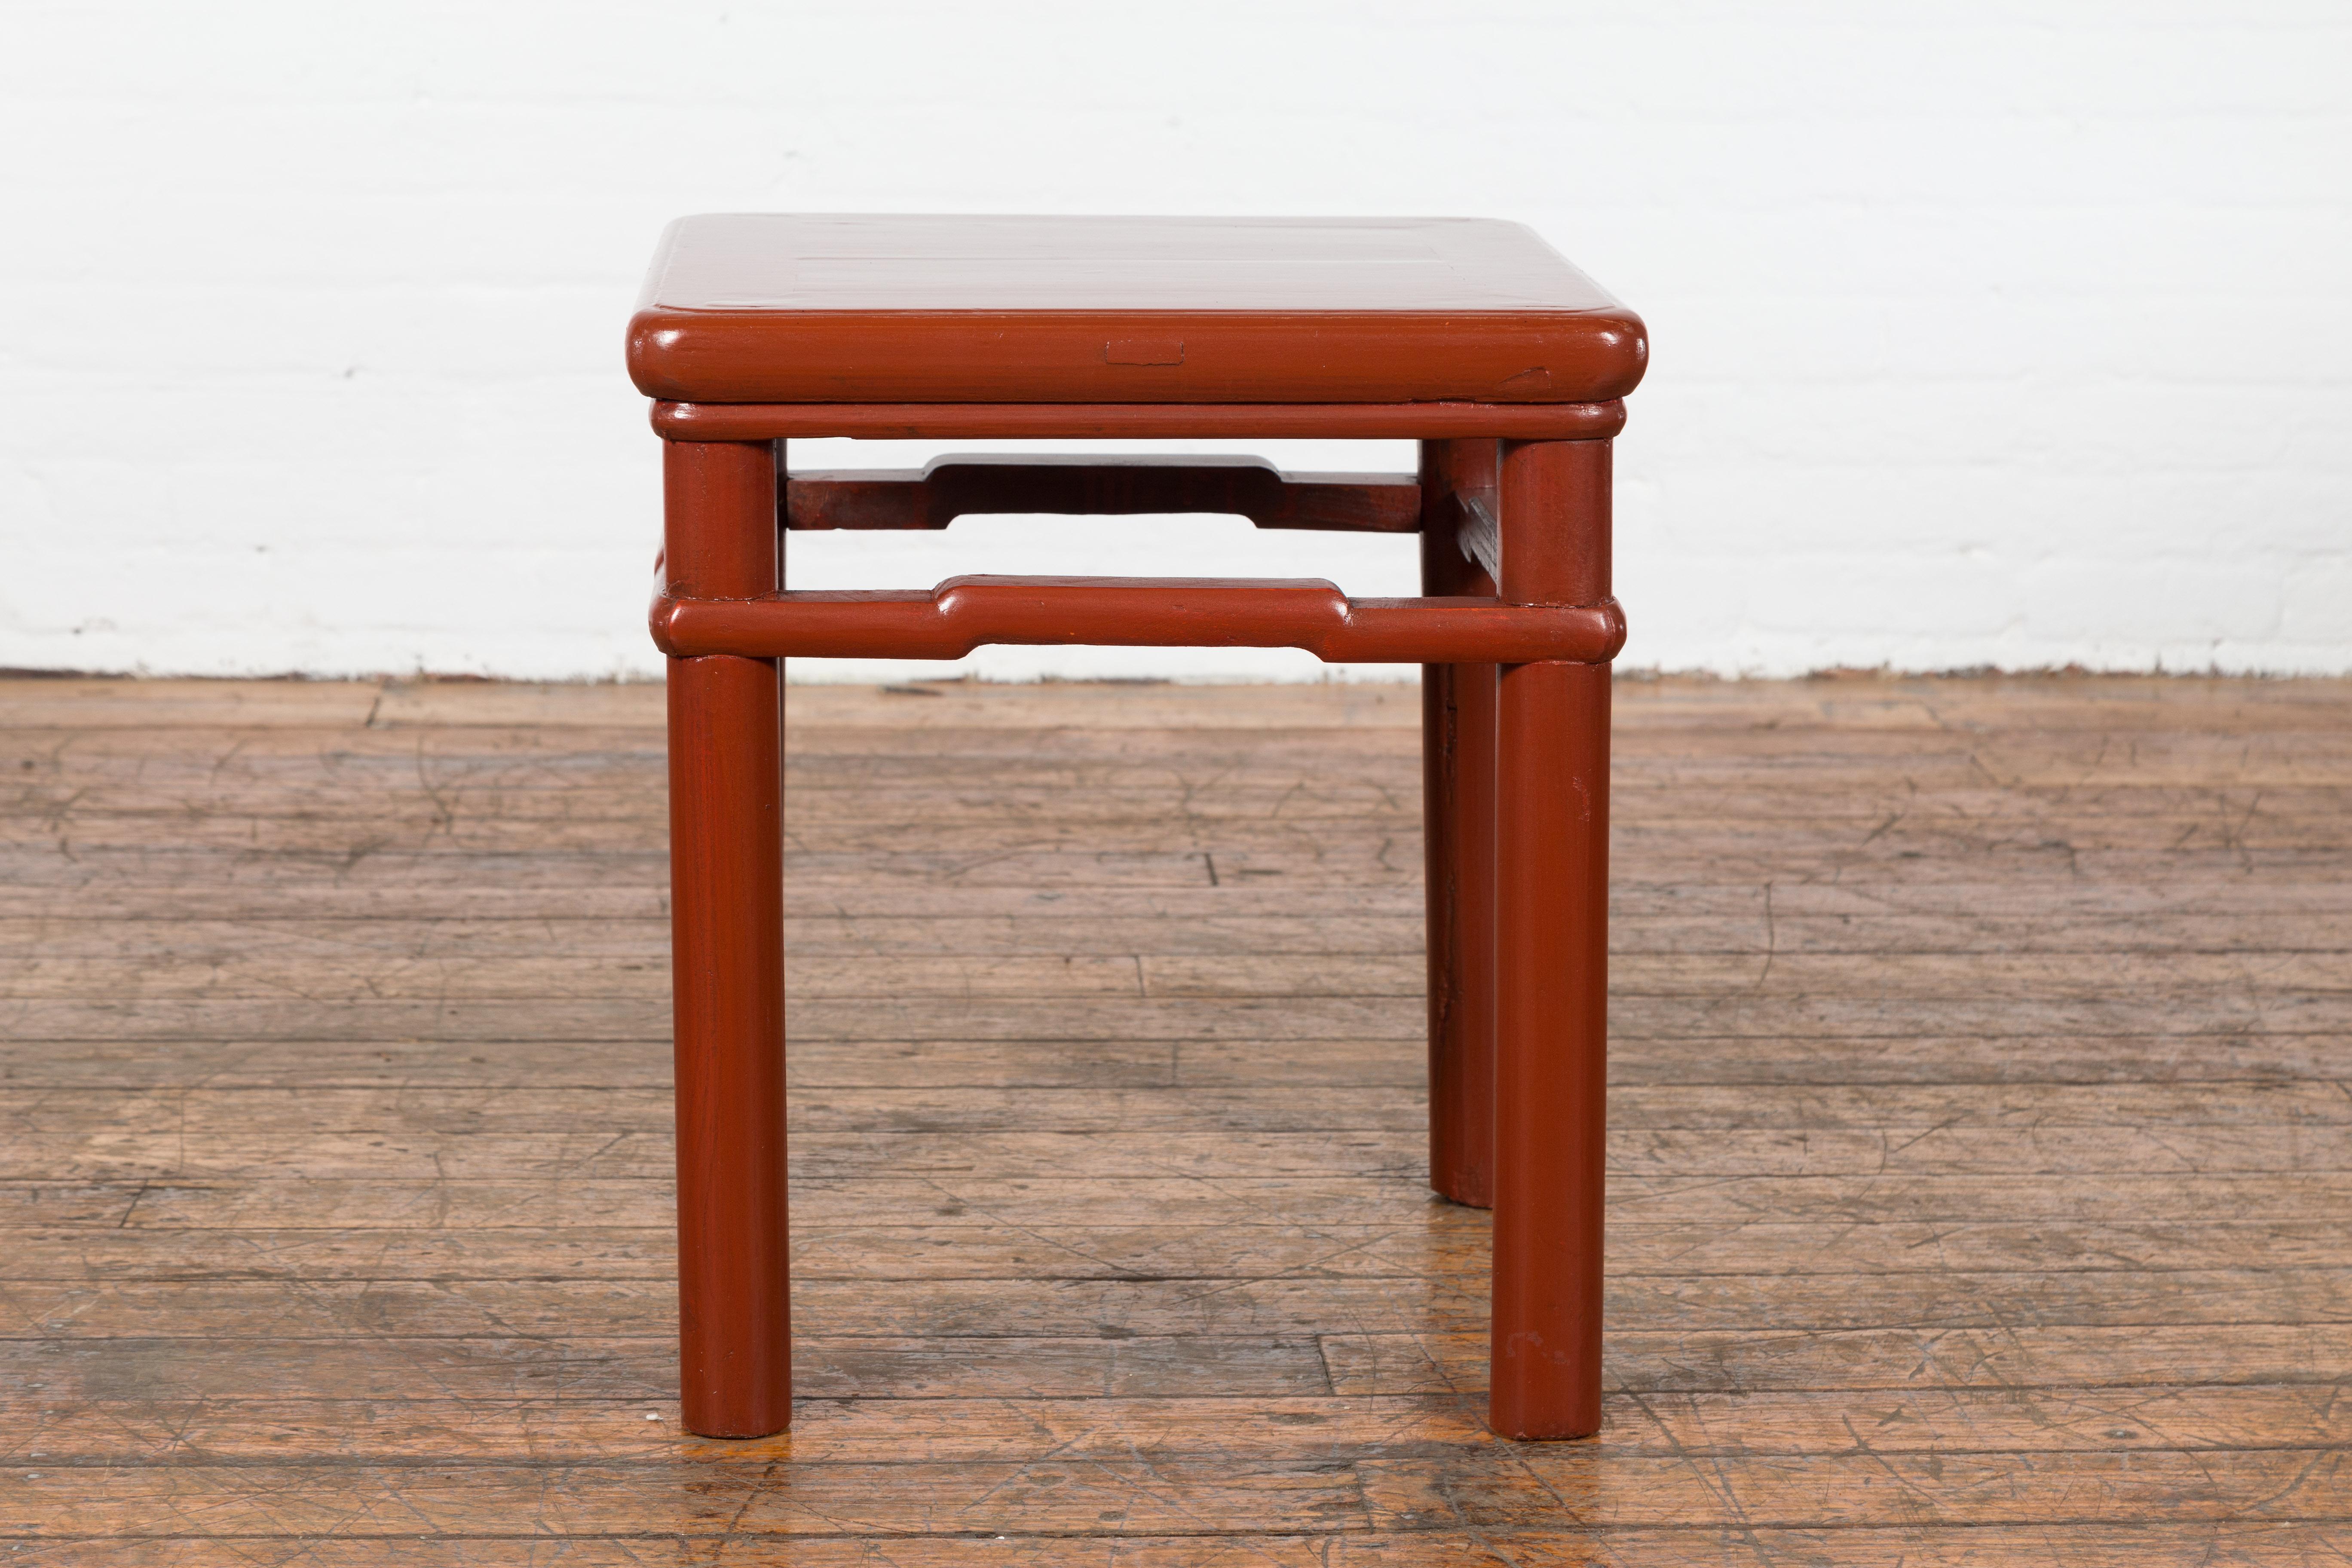 Chinese 1900s Qing Dynasty Red Lacquer Stool or Table with Humpback Stretchers For Sale 9